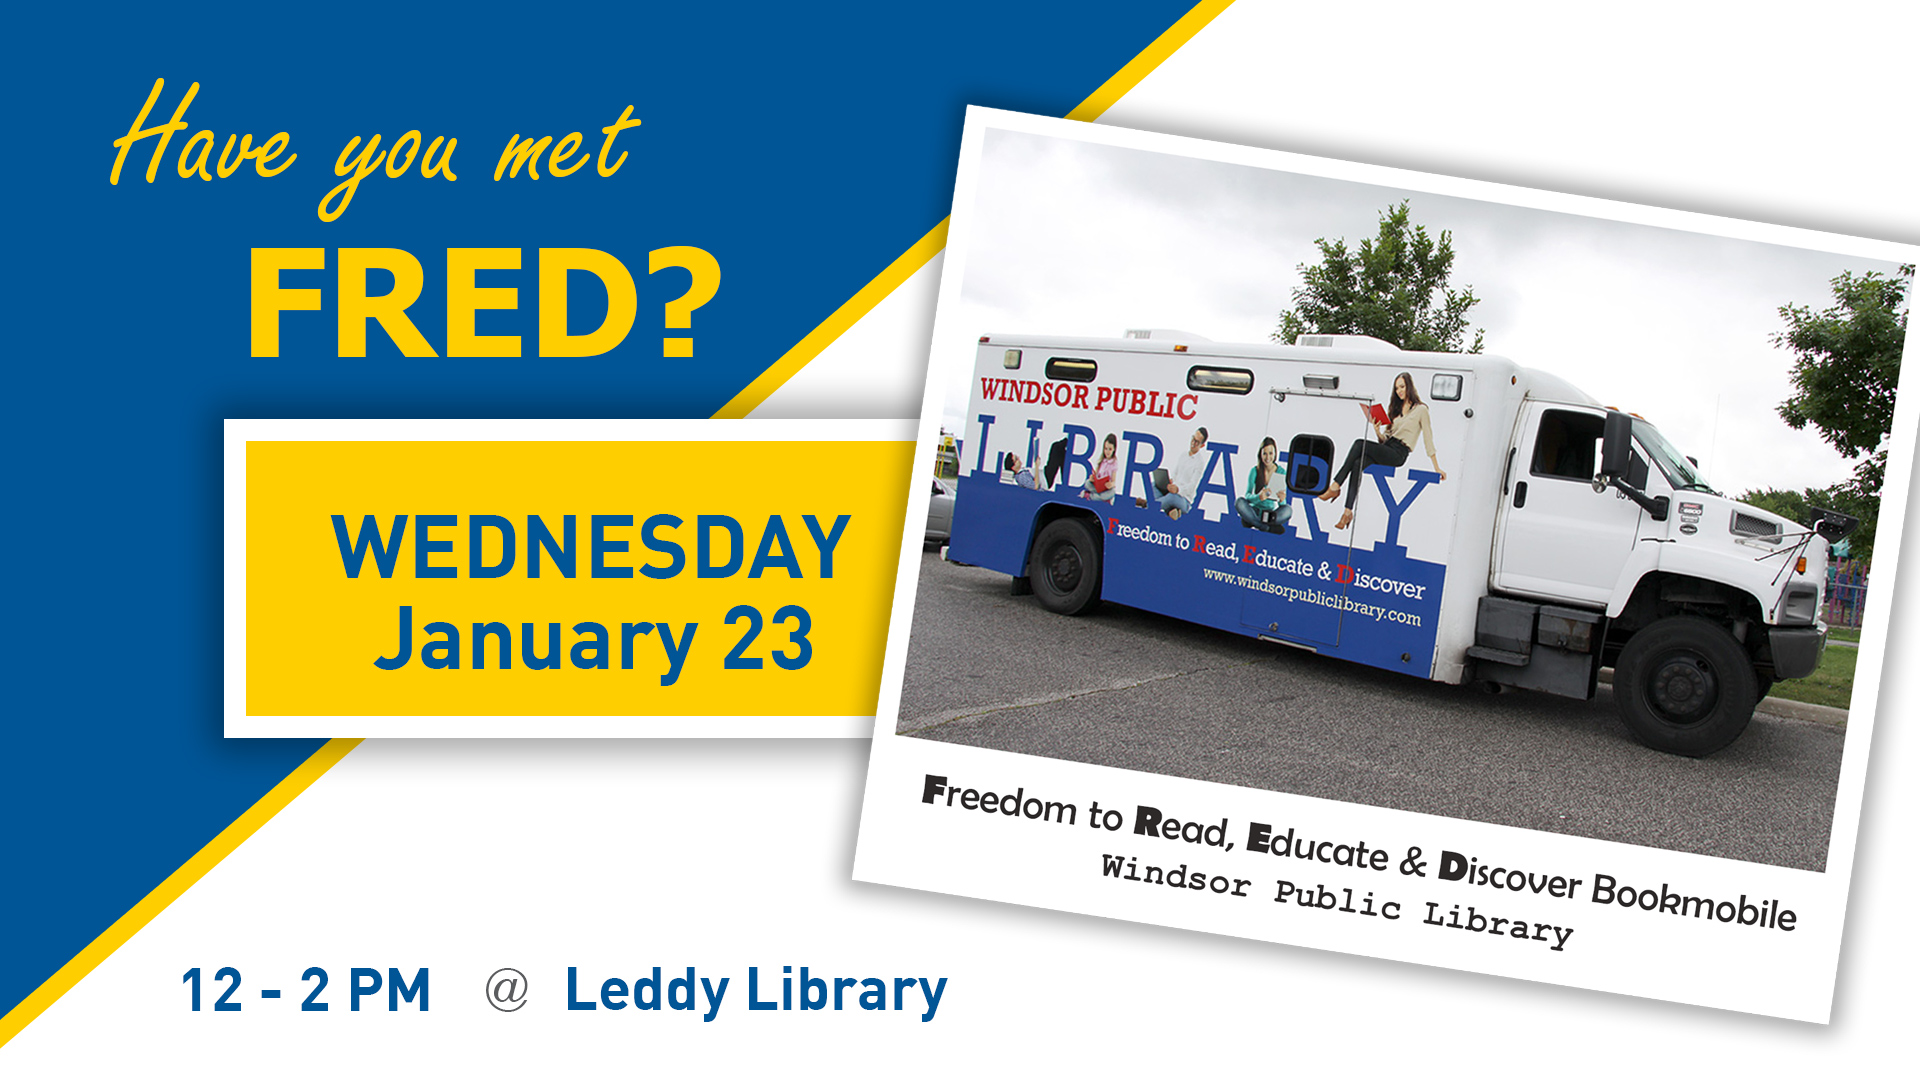 Image of the Freedom to read, educate and discover (FRED) bookmobile.